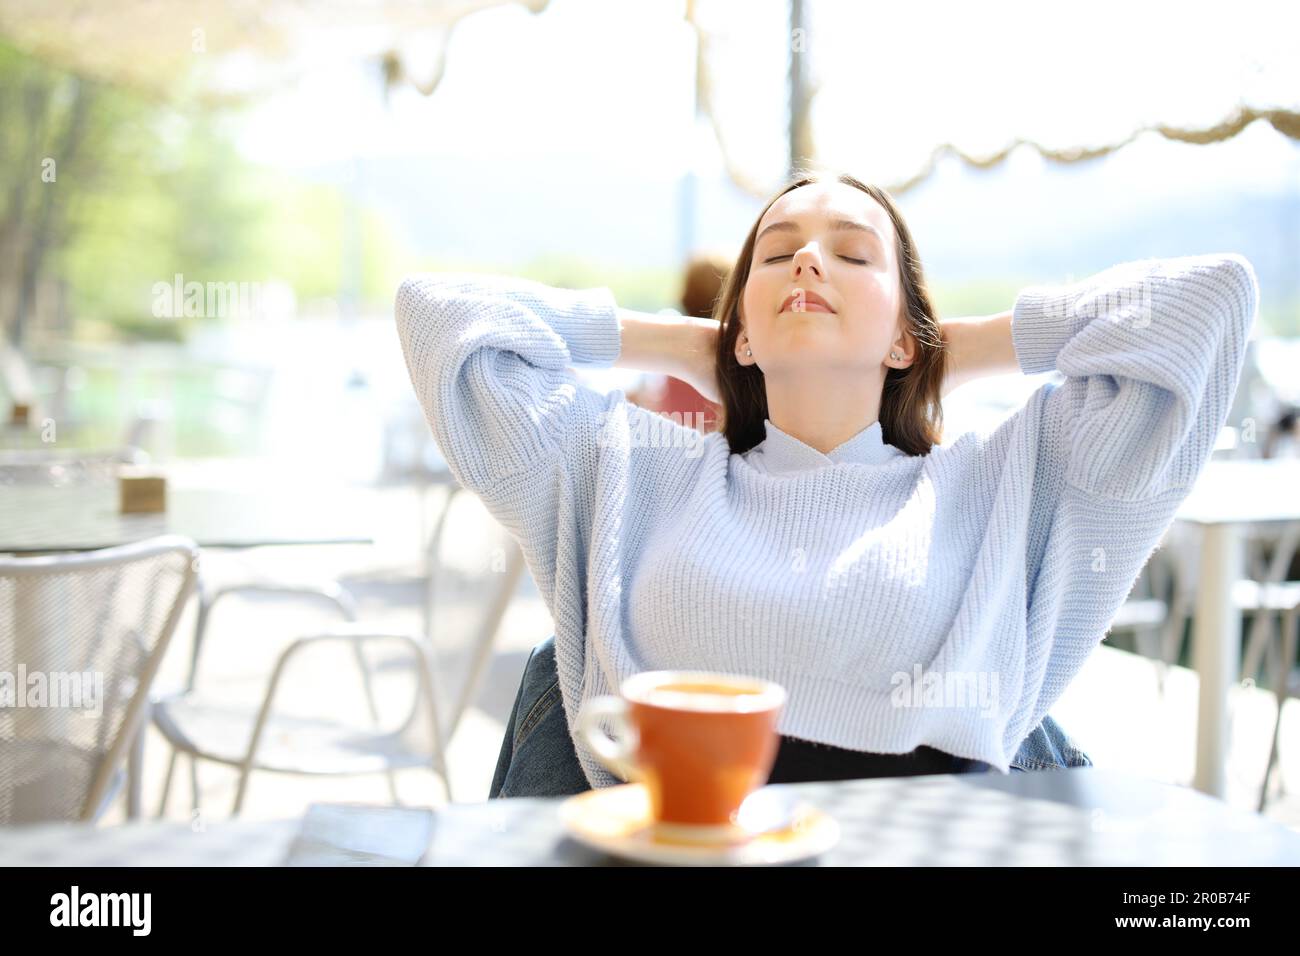 Relaxed woman with hands on head sitting in a coffee shop terrace Stock Photo